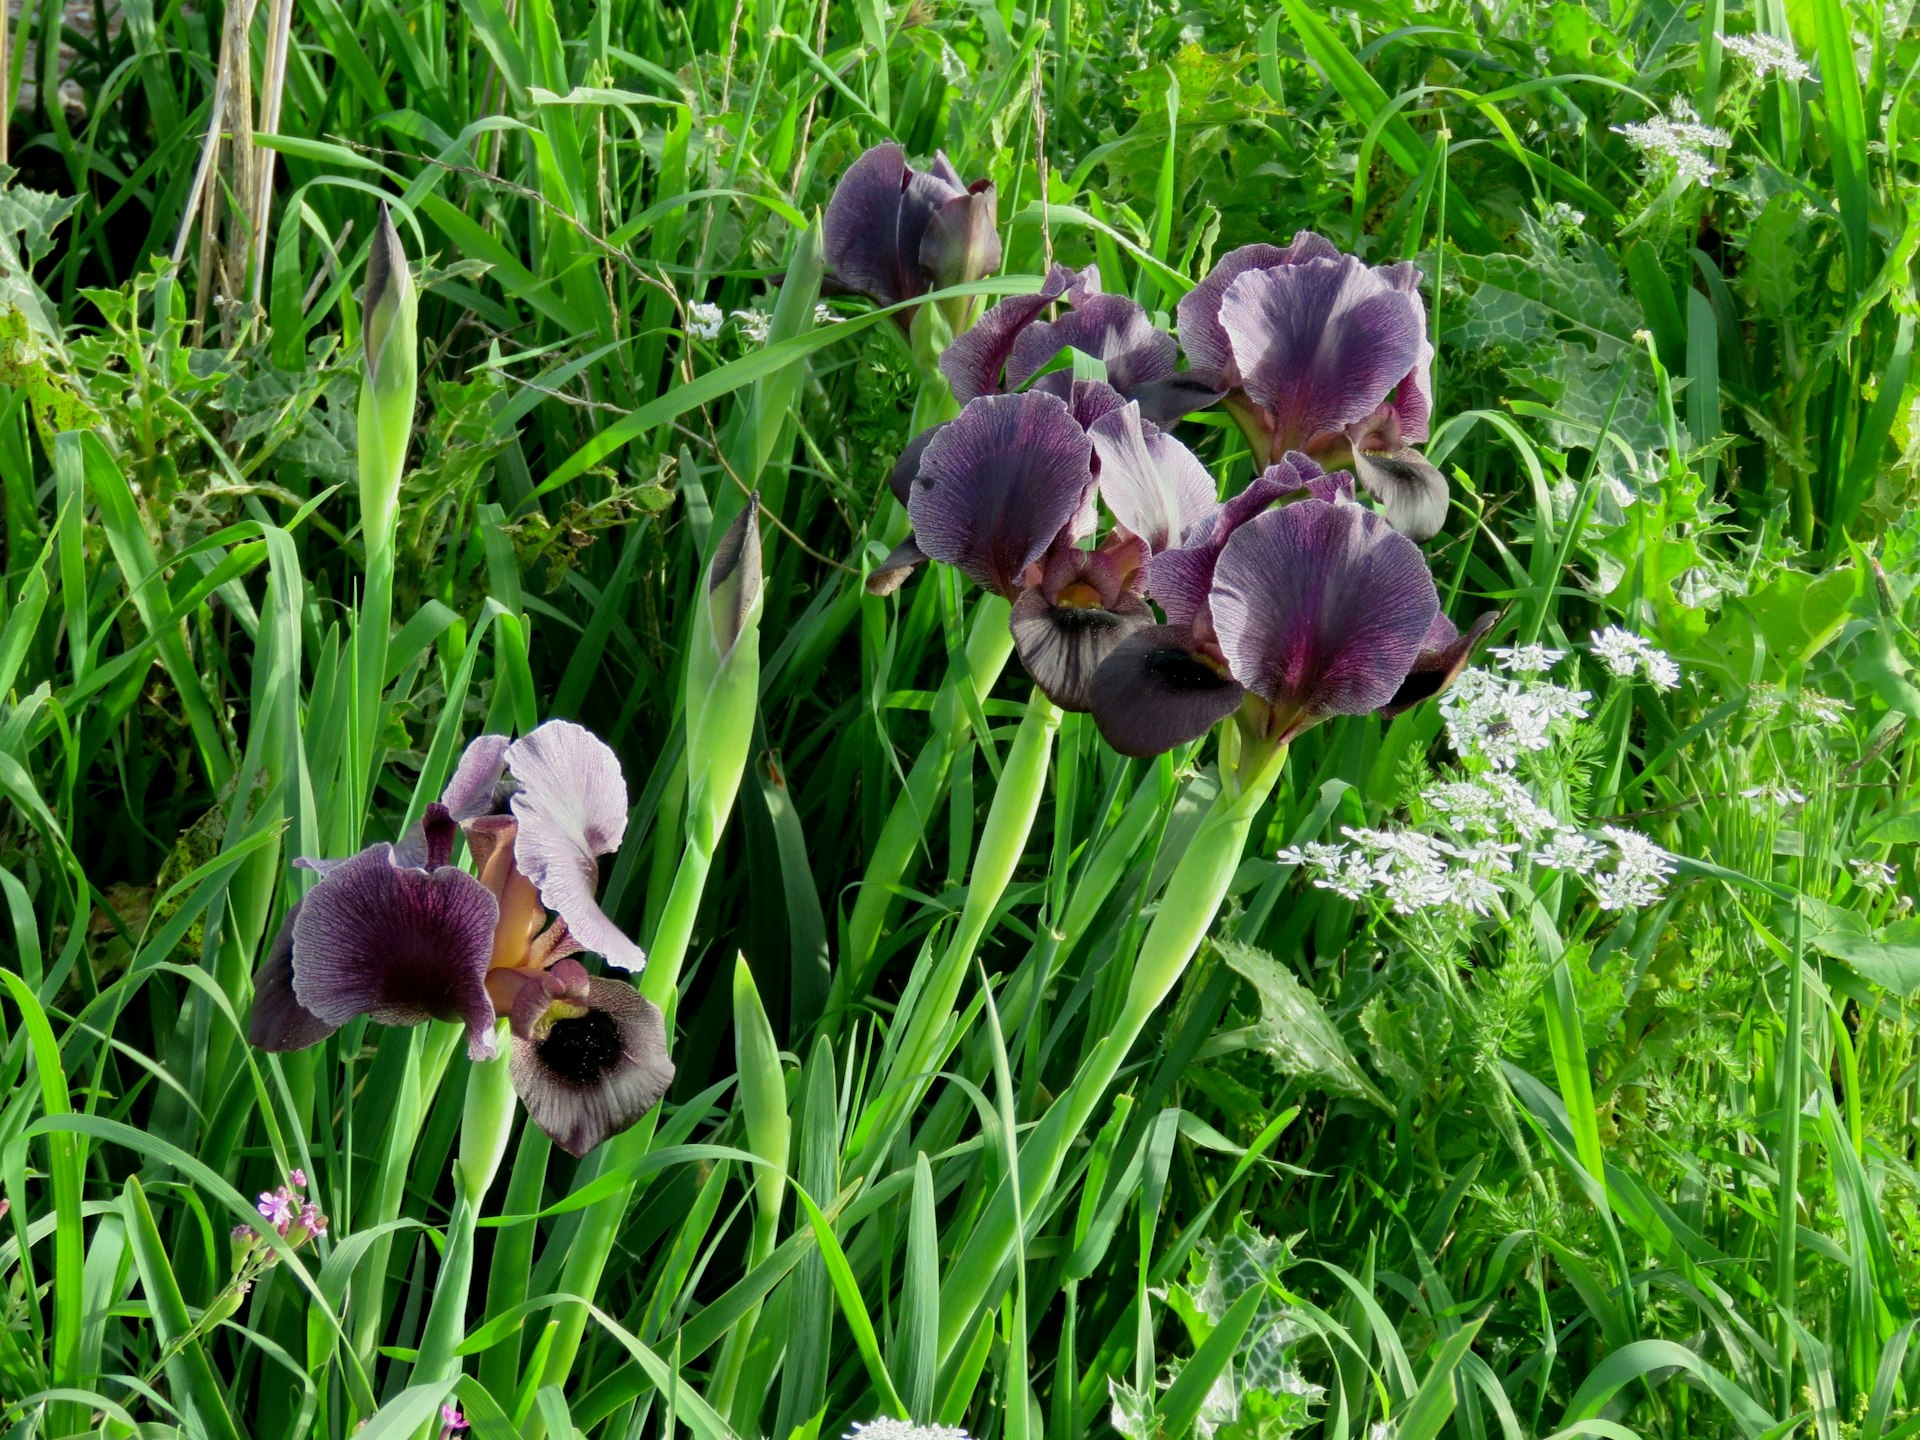 A small cluster of black iris flowers growing in grass 